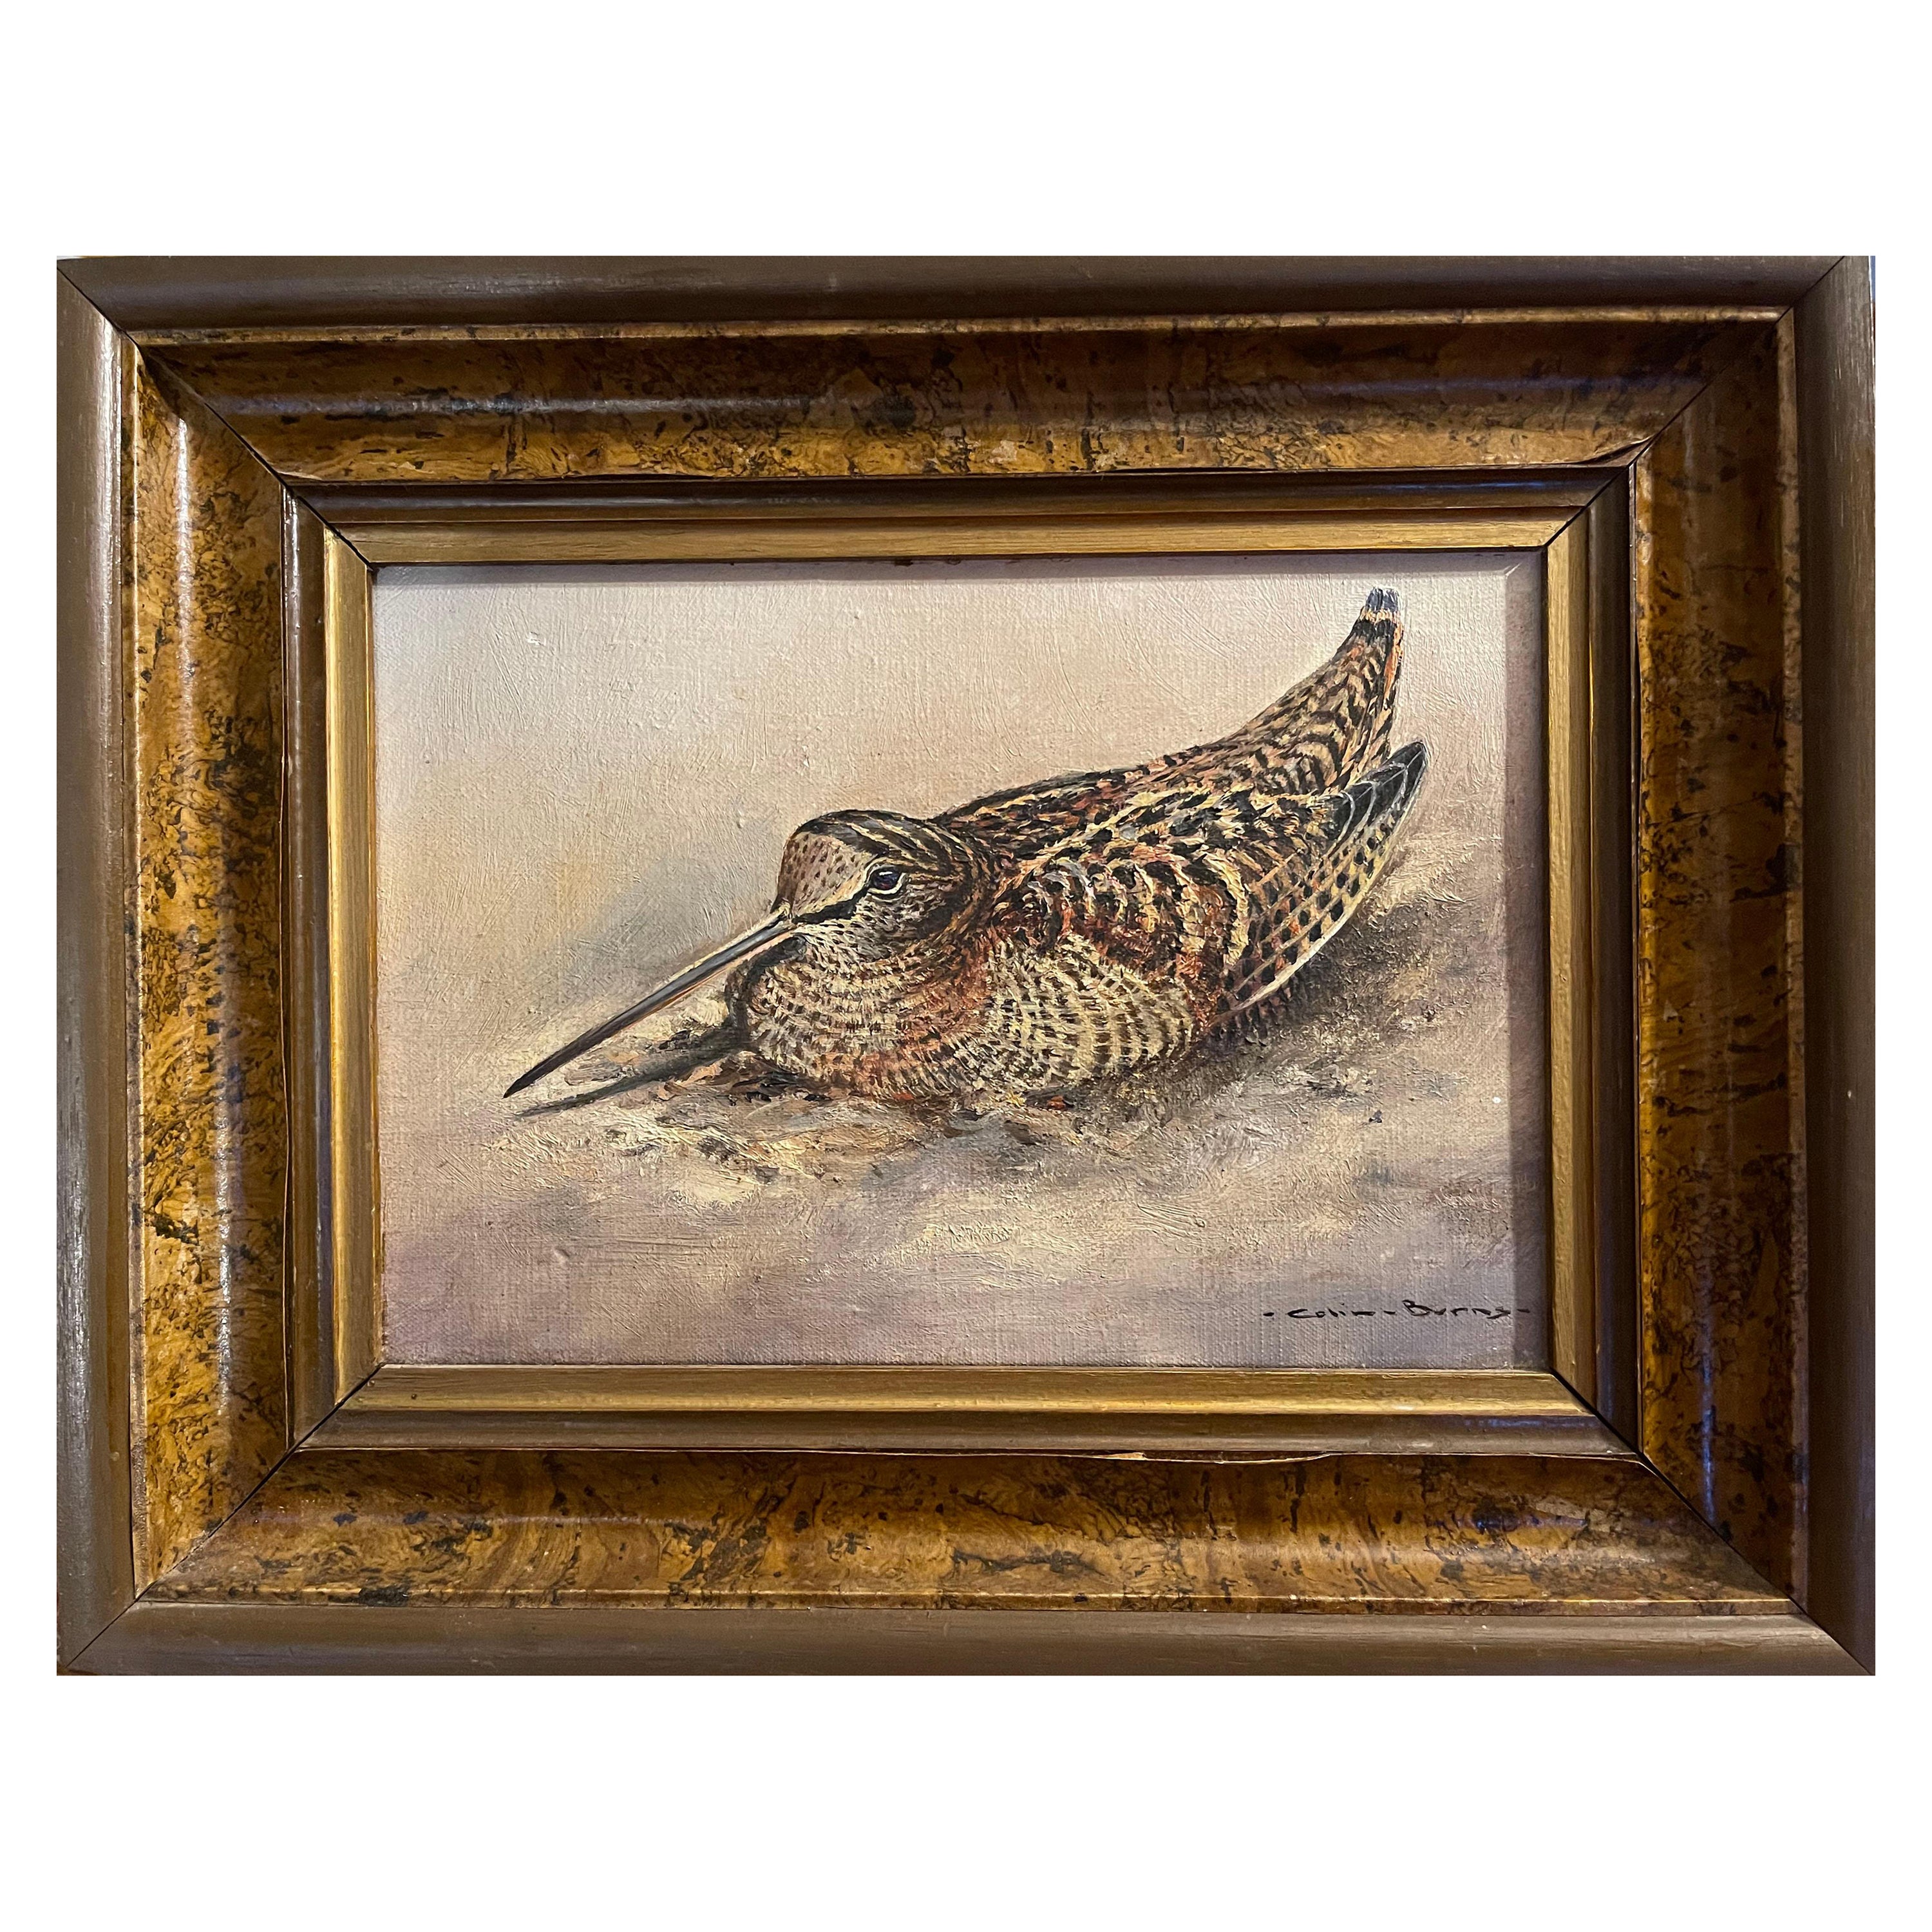 20th Century Oil on Canvas Painting Entitled "Woodcock" by Colin Burns For Sale